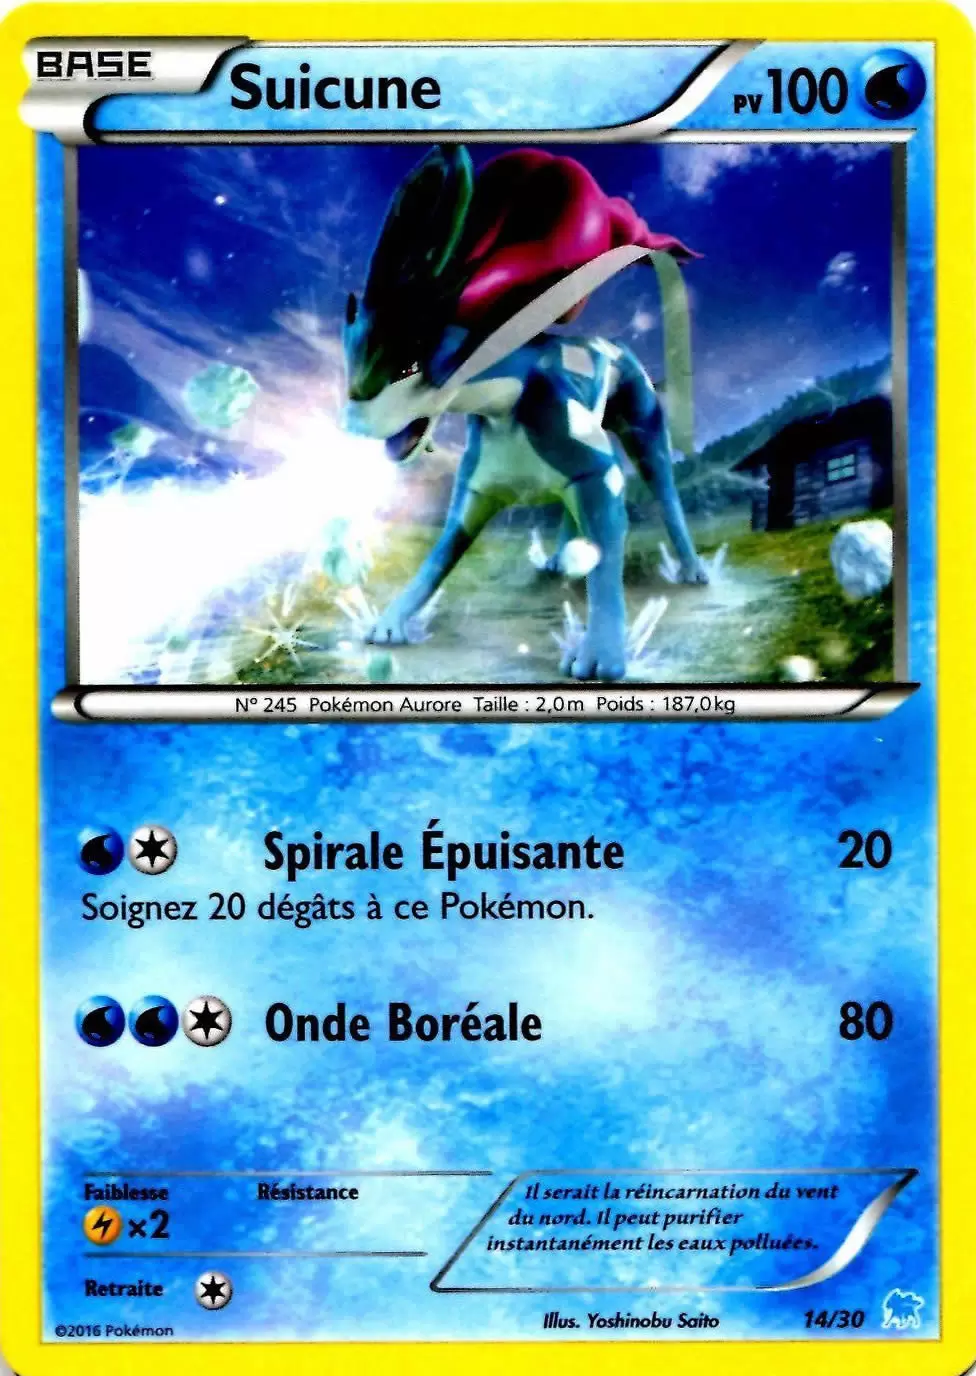 XY Trainer Kit (Suicune) - Suicune